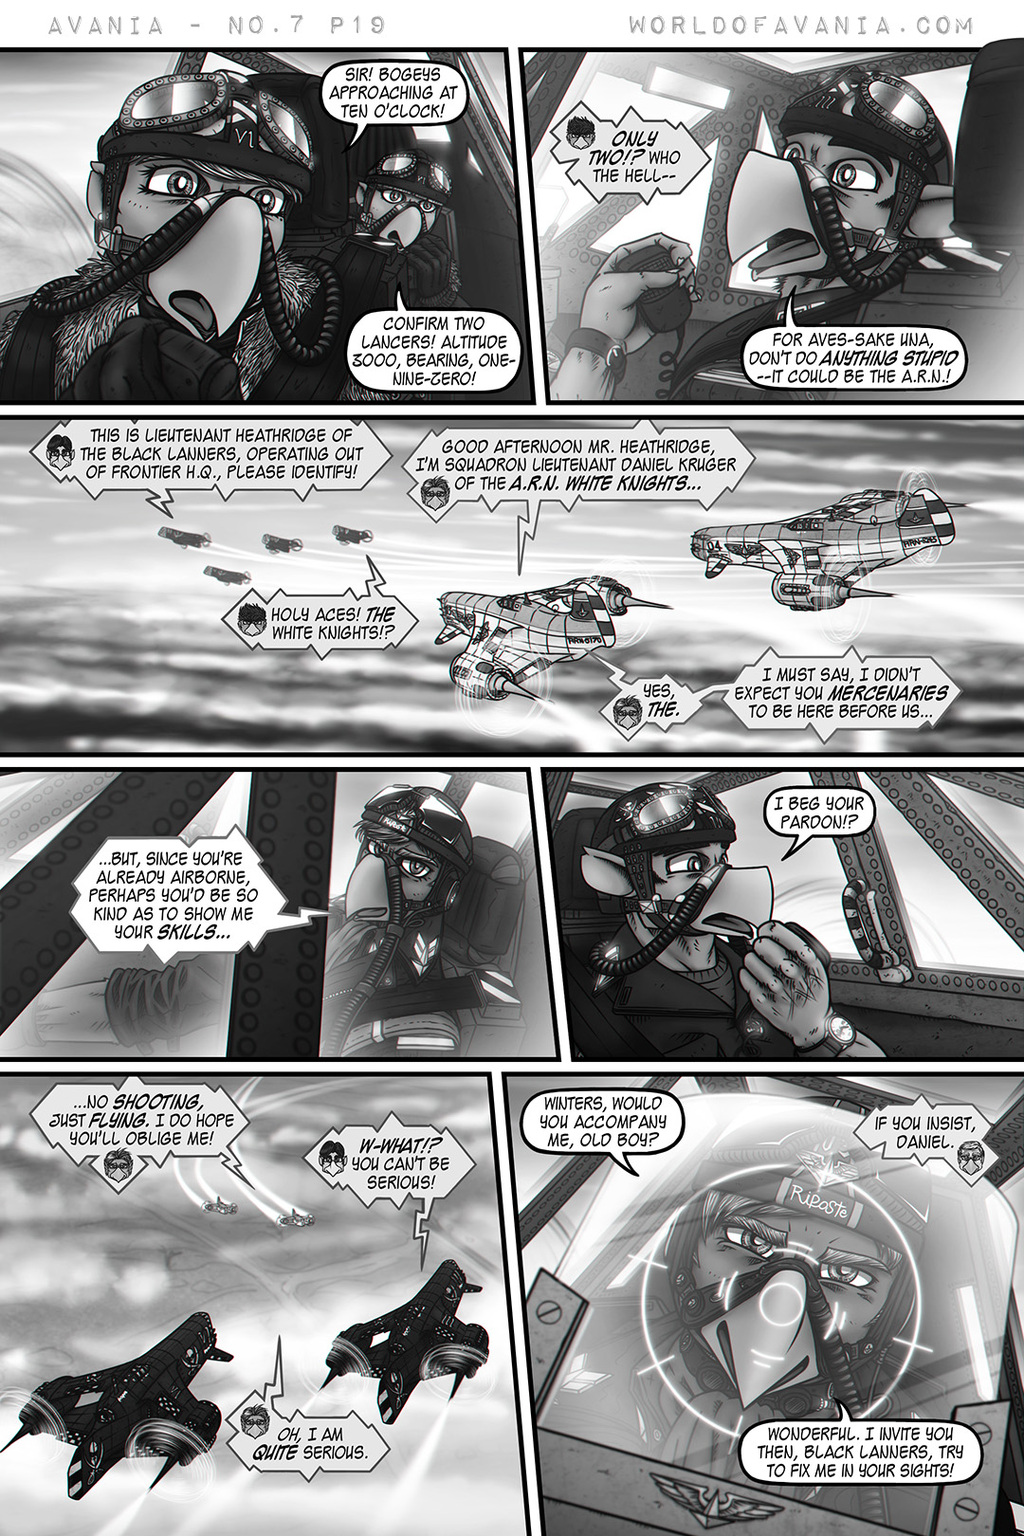 Avania Comic - Issue No.7, Page 19